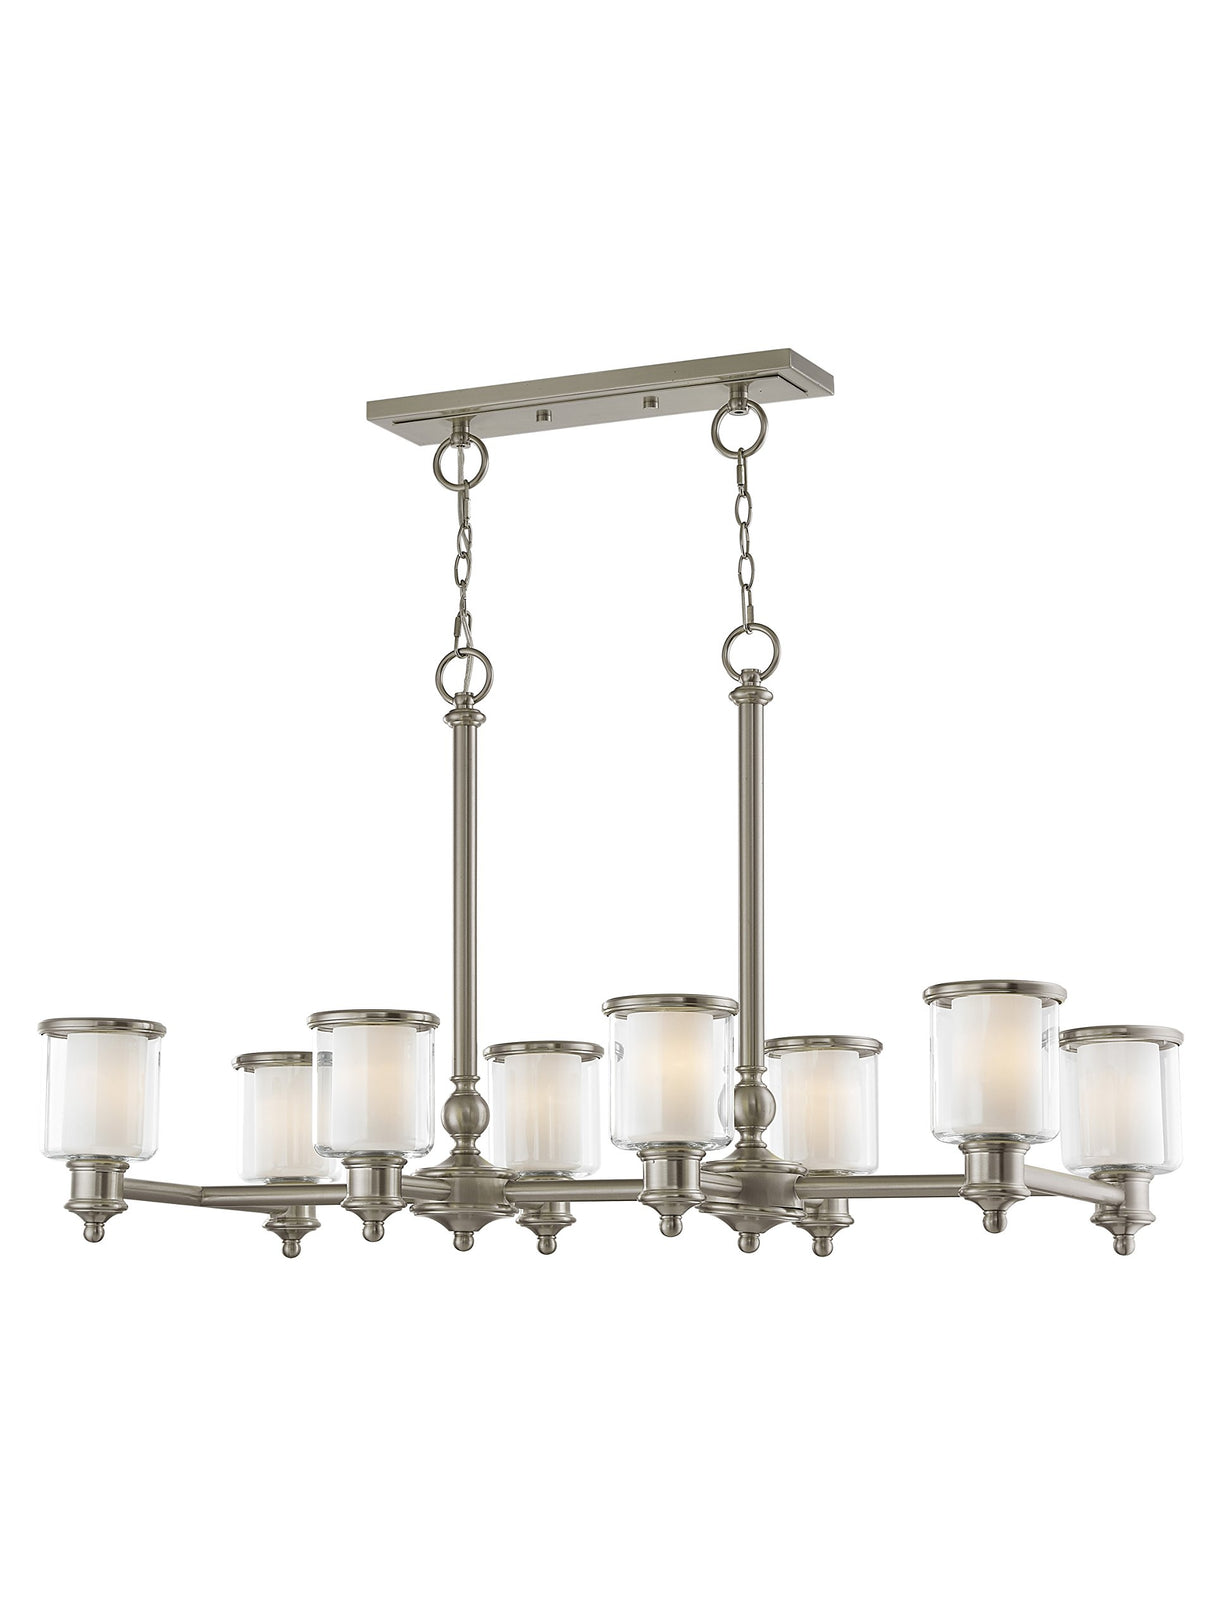 Livex Lighting 40208-91 Transitional Eight Light Linear Chandelier from Middlebush Collection in Pwt, Nckl, B/S, Slvr. Finish, 41.75 inches, 24.50x41.75x20.00, Brushed Nickel